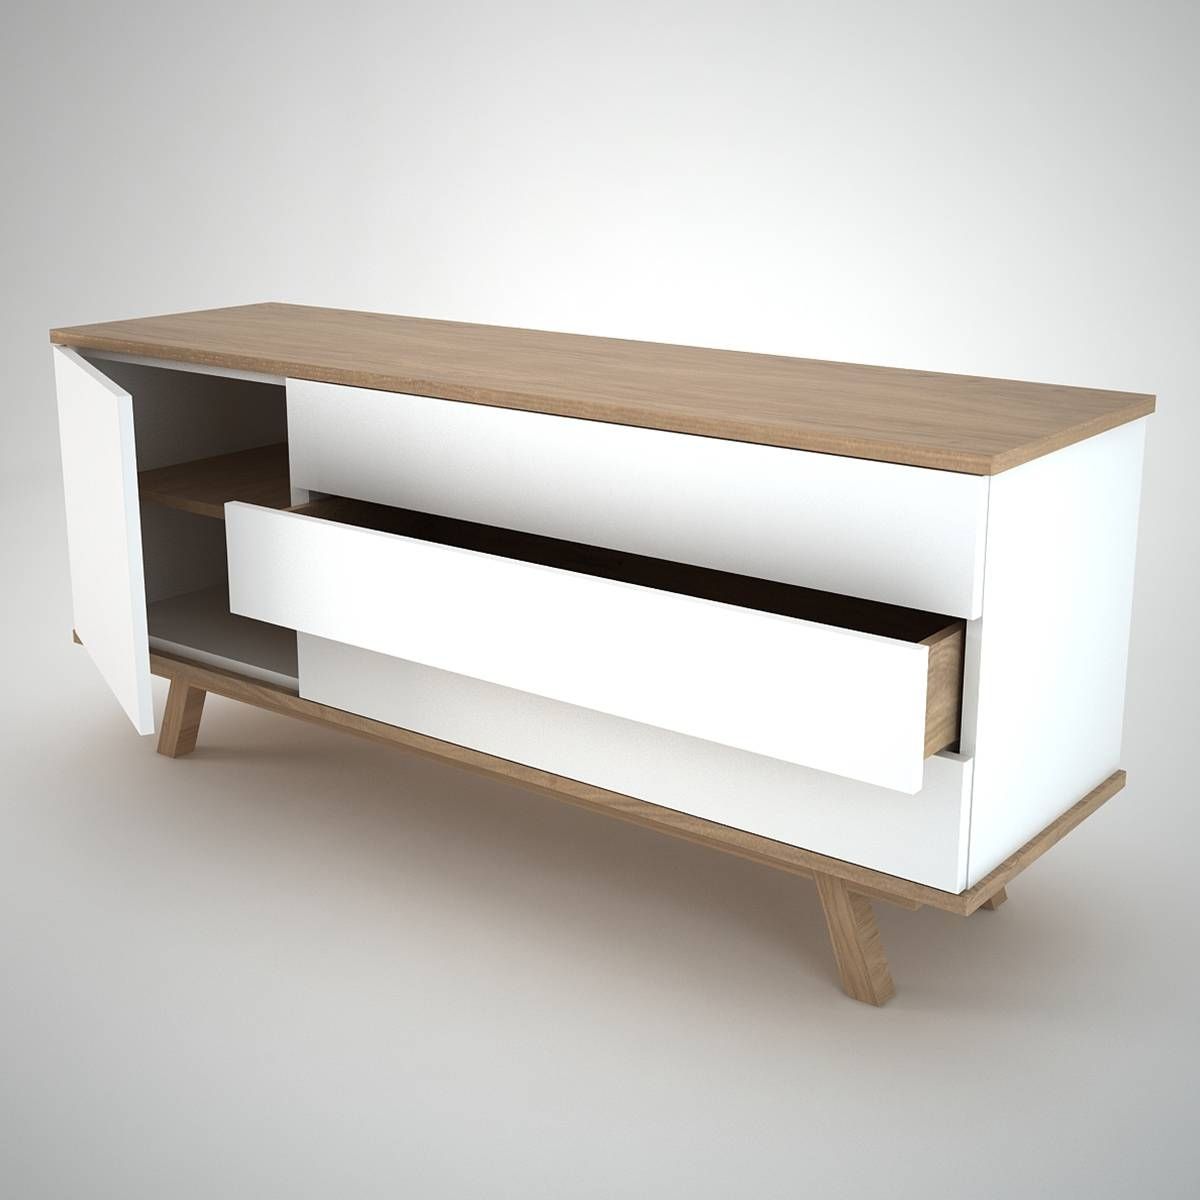 Furniture: Beautiful Profile Modern Sideboard For Living Room Throughout Contemporary White Sideboard (View 10 of 20)